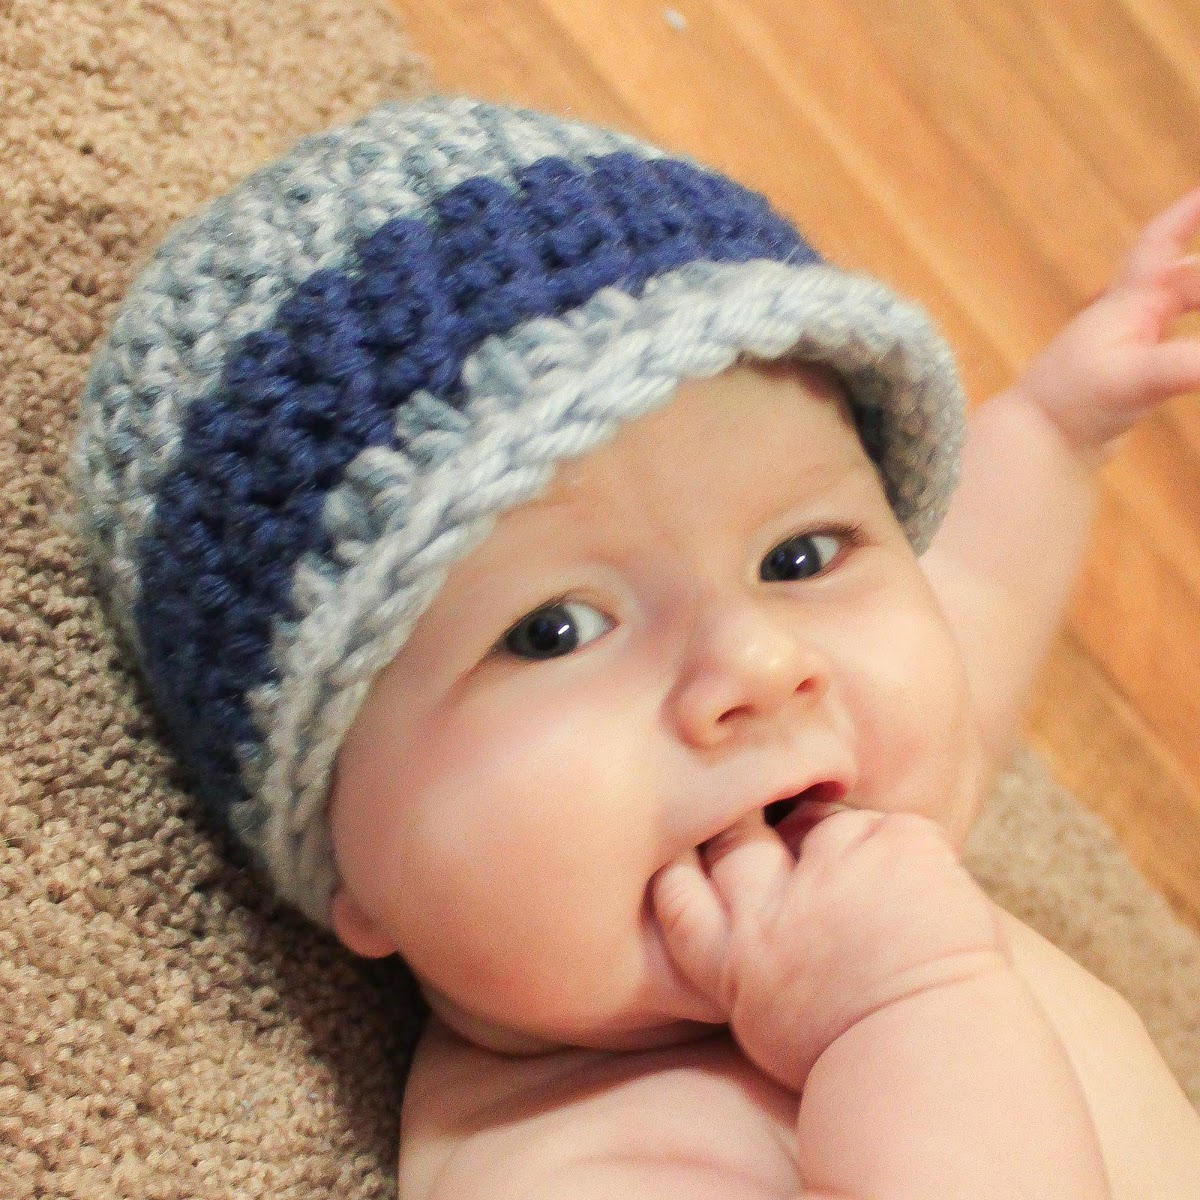 Baby Boy Crochet Hats Free Pattern Knitted Hats For Kids Go To Shop Or Start To Knit